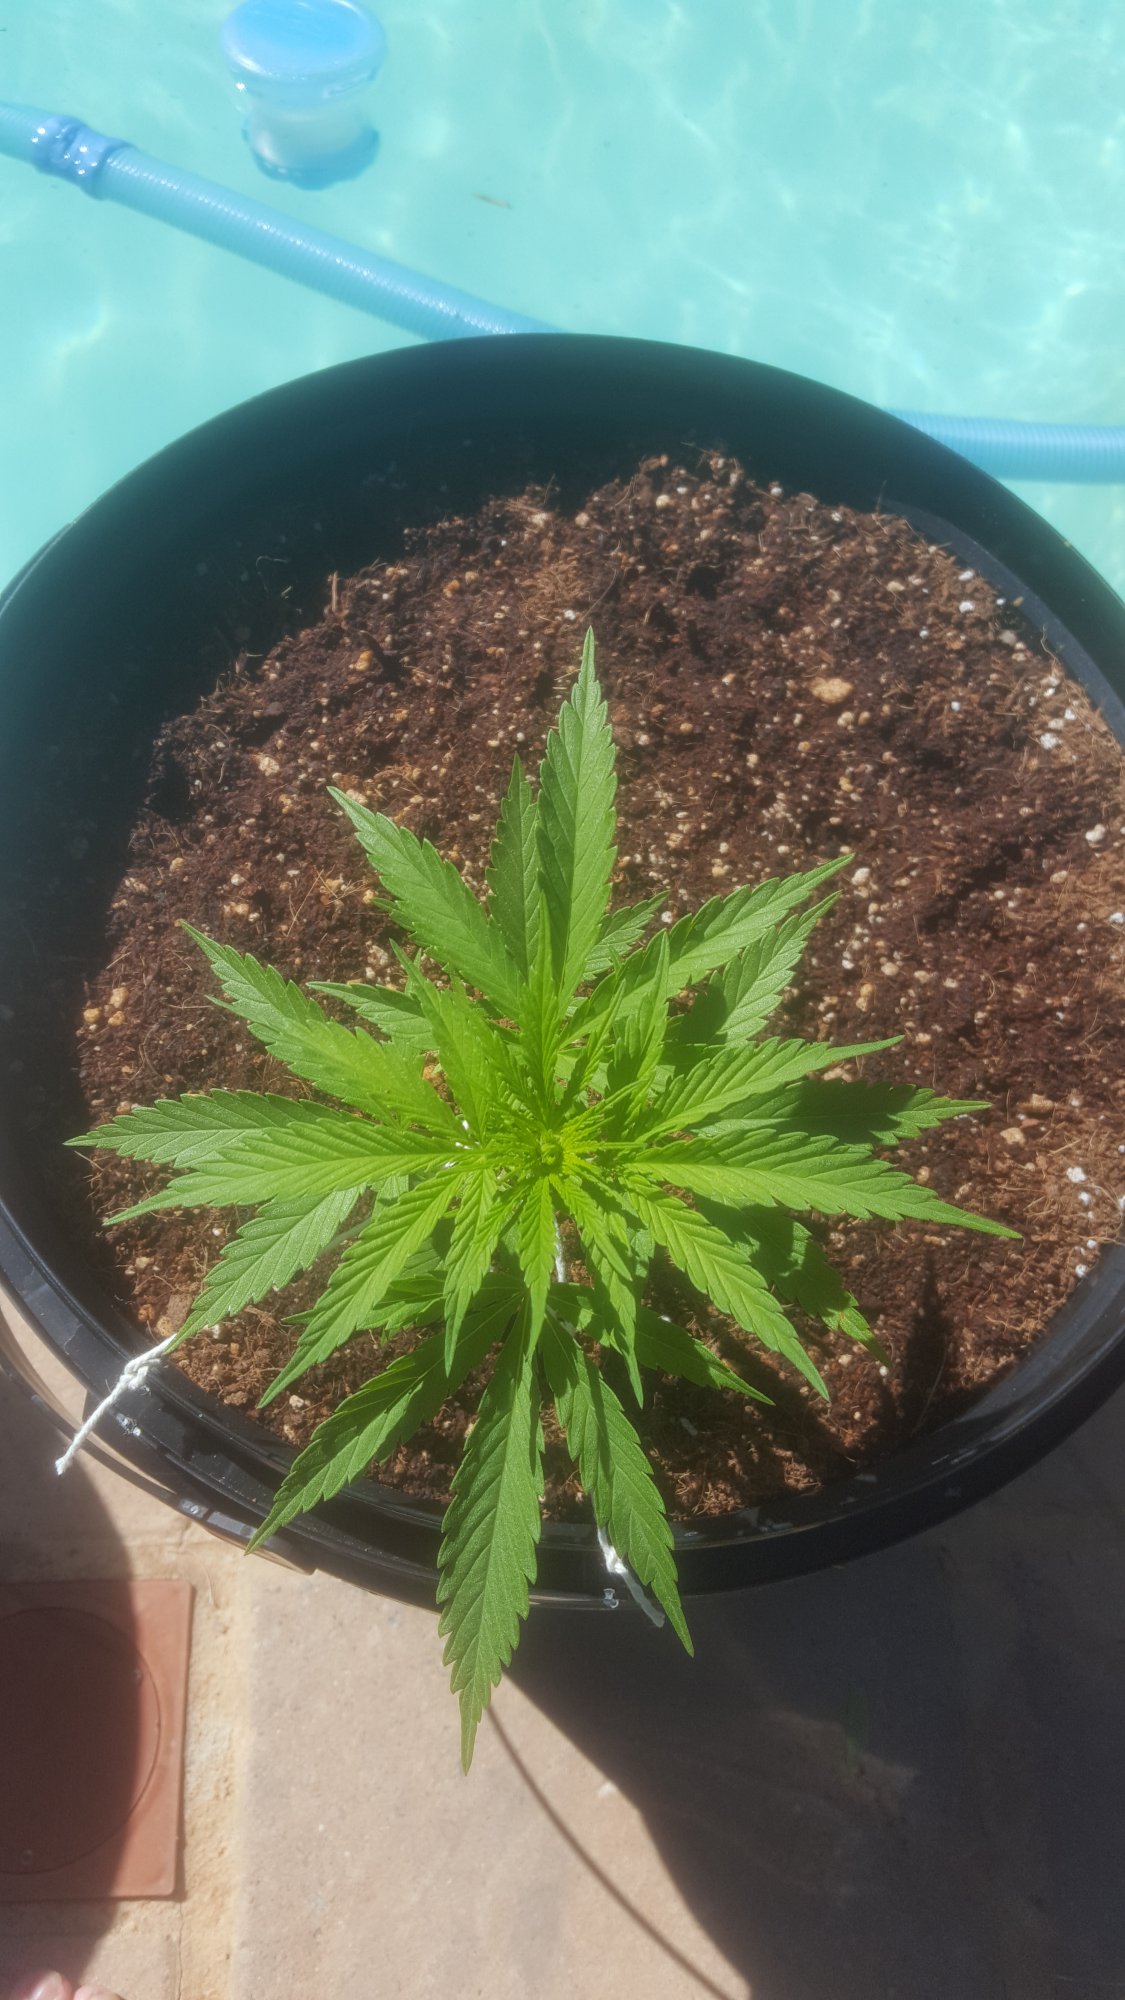 My current grows 4 weeks old 4